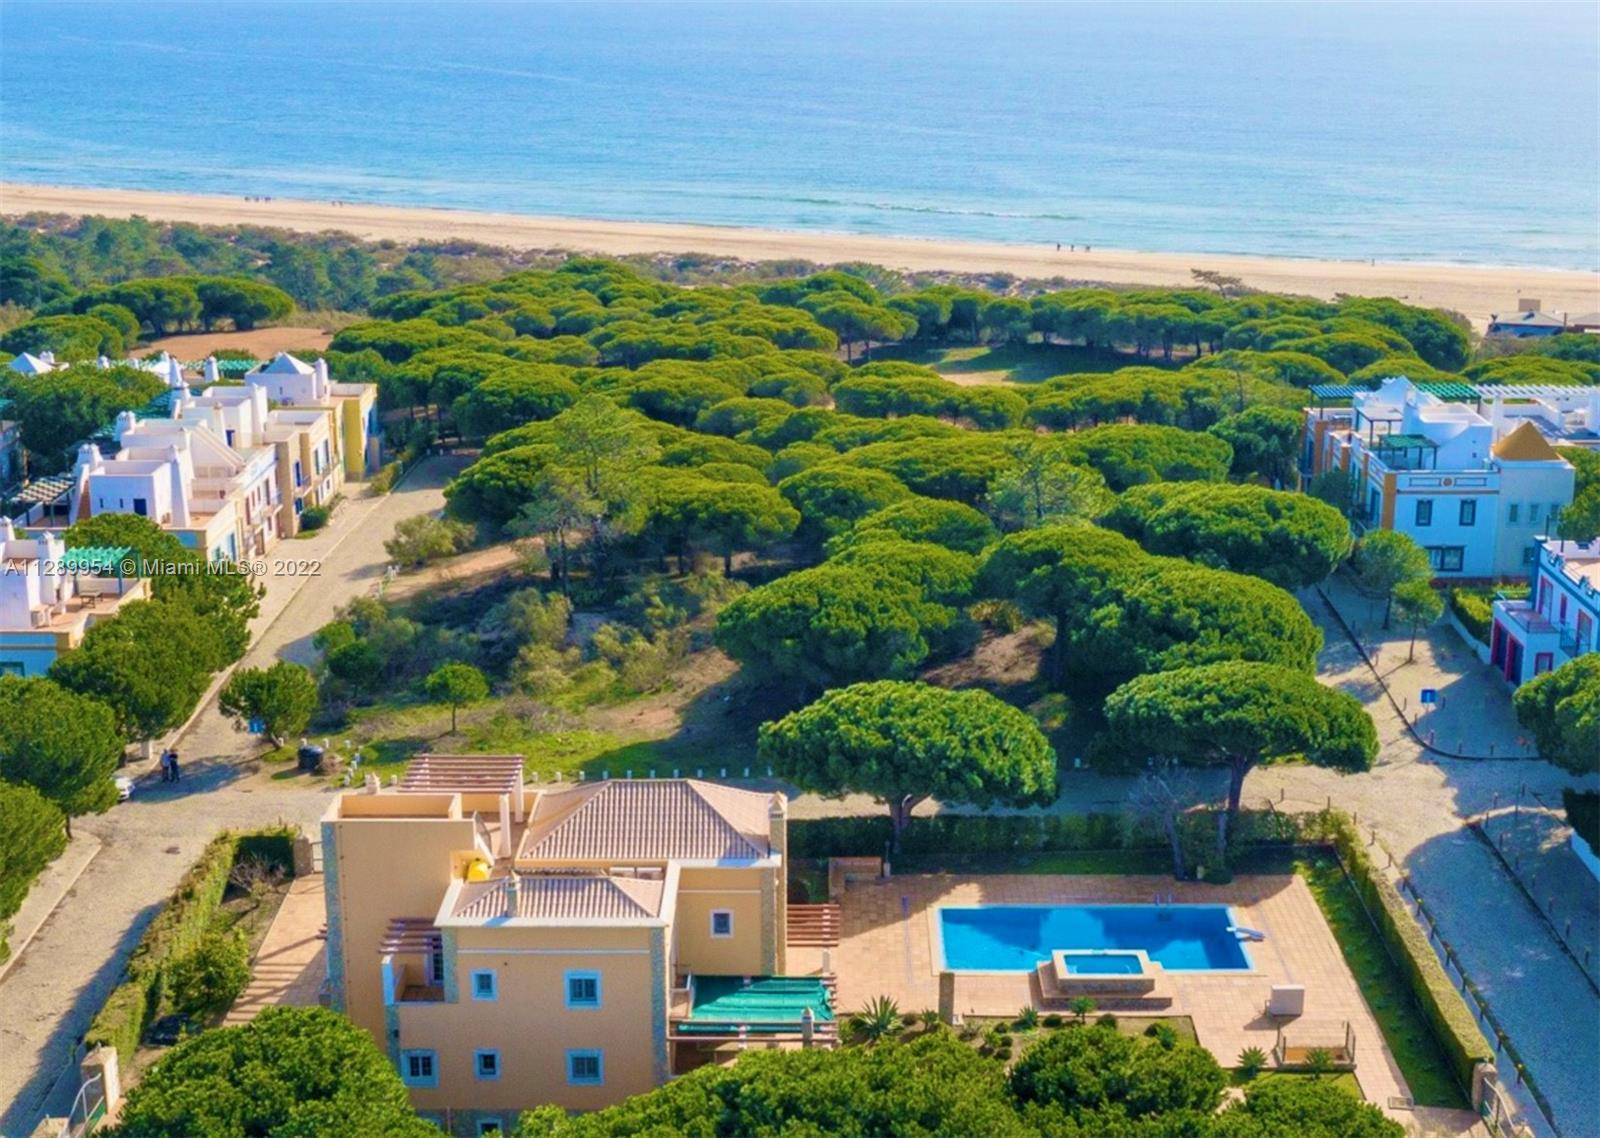 Located on the beach on the southern coast of Portugal near Spain alongside other villas and golf courses, this large villa is ideally situated to experience the best of the ...